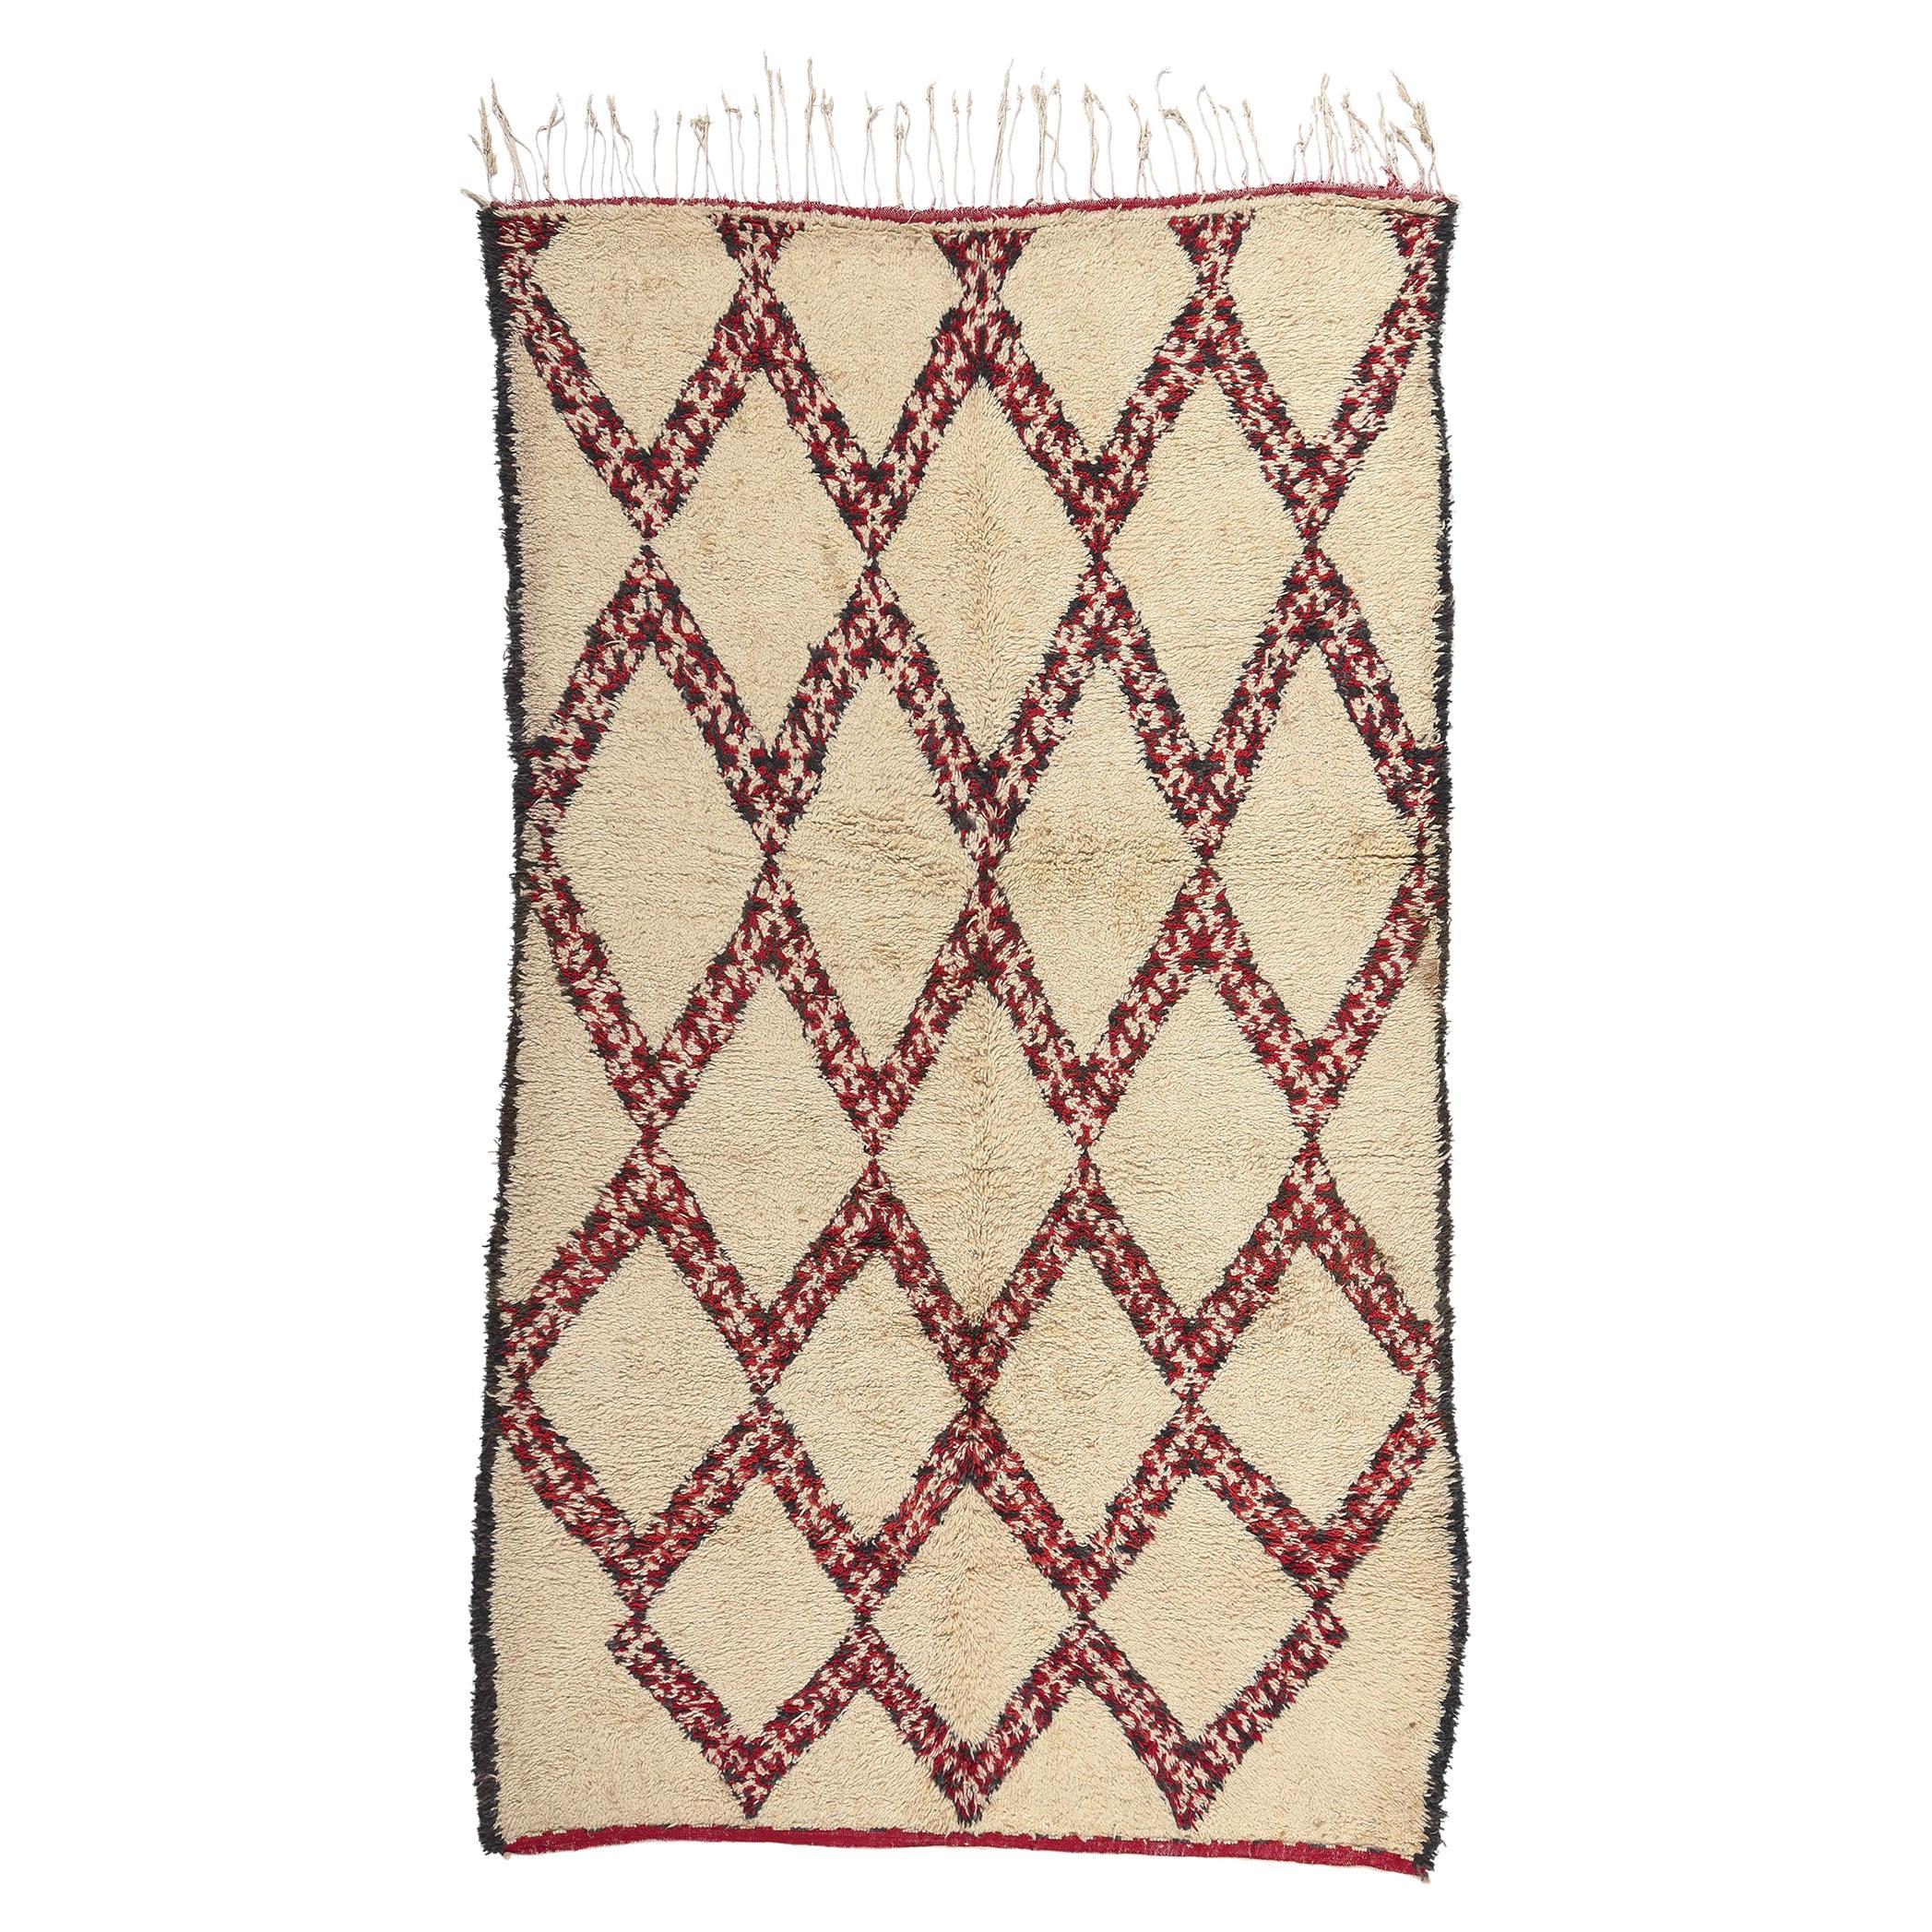 Vintage Moroccan Beni Ourain Rug, Midcentury Modern Meets Cozy Hygge For Sale